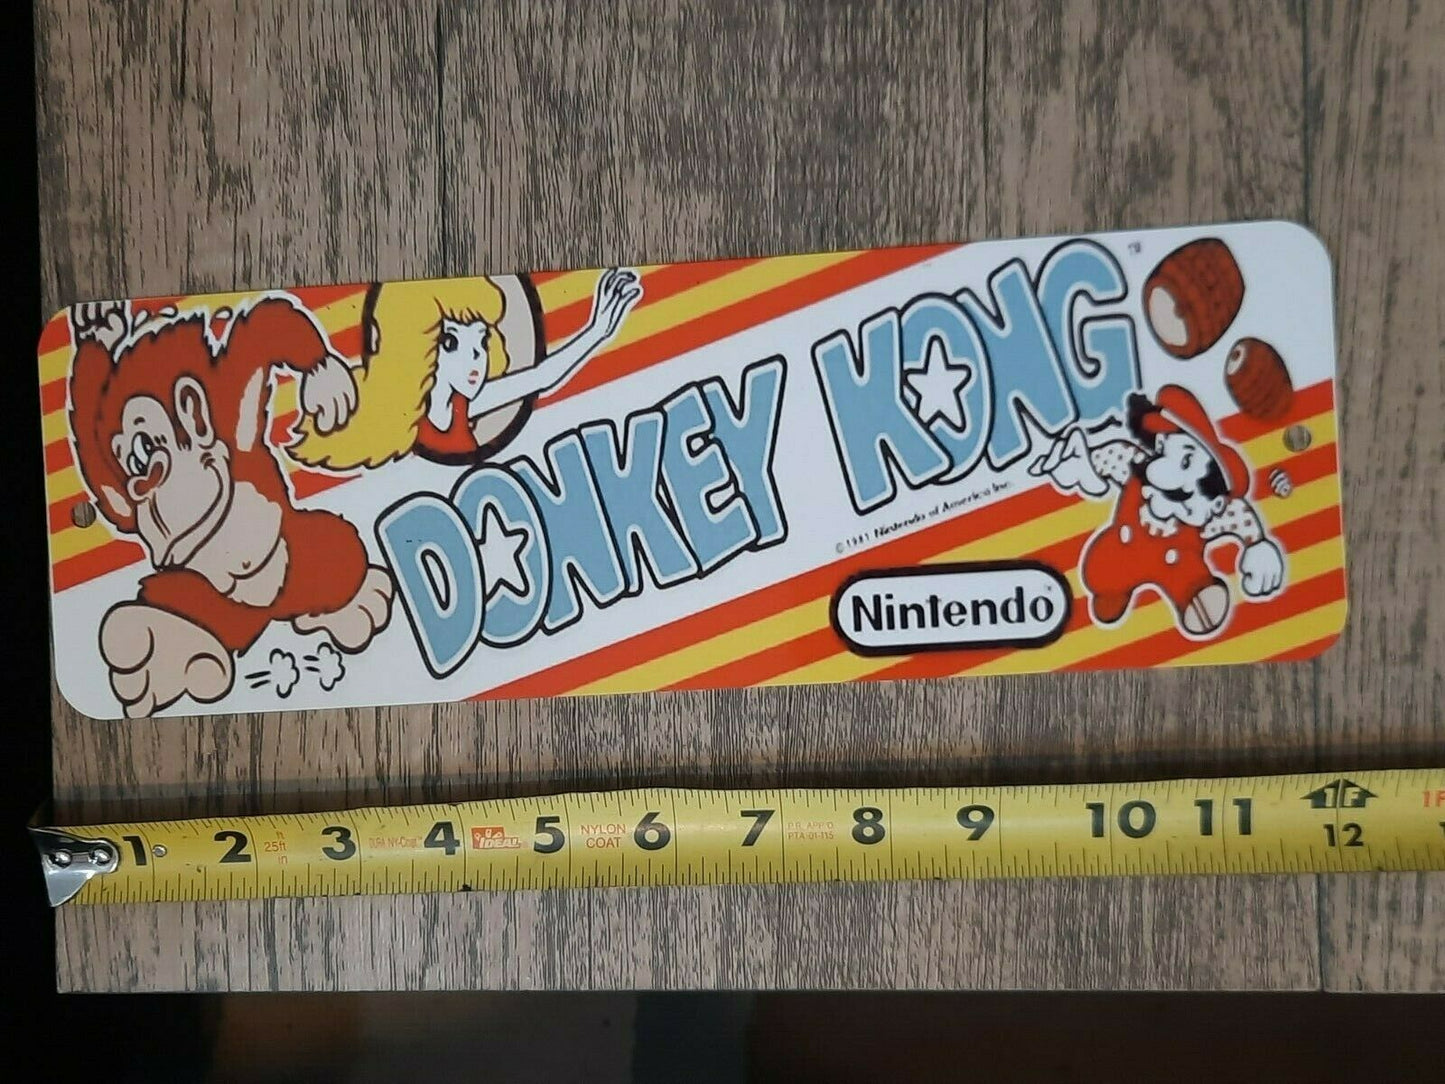 Donkey Kong Classic Arcade Video Game Marquee Banner 4x12 Metal Wall Sign Retro 80s